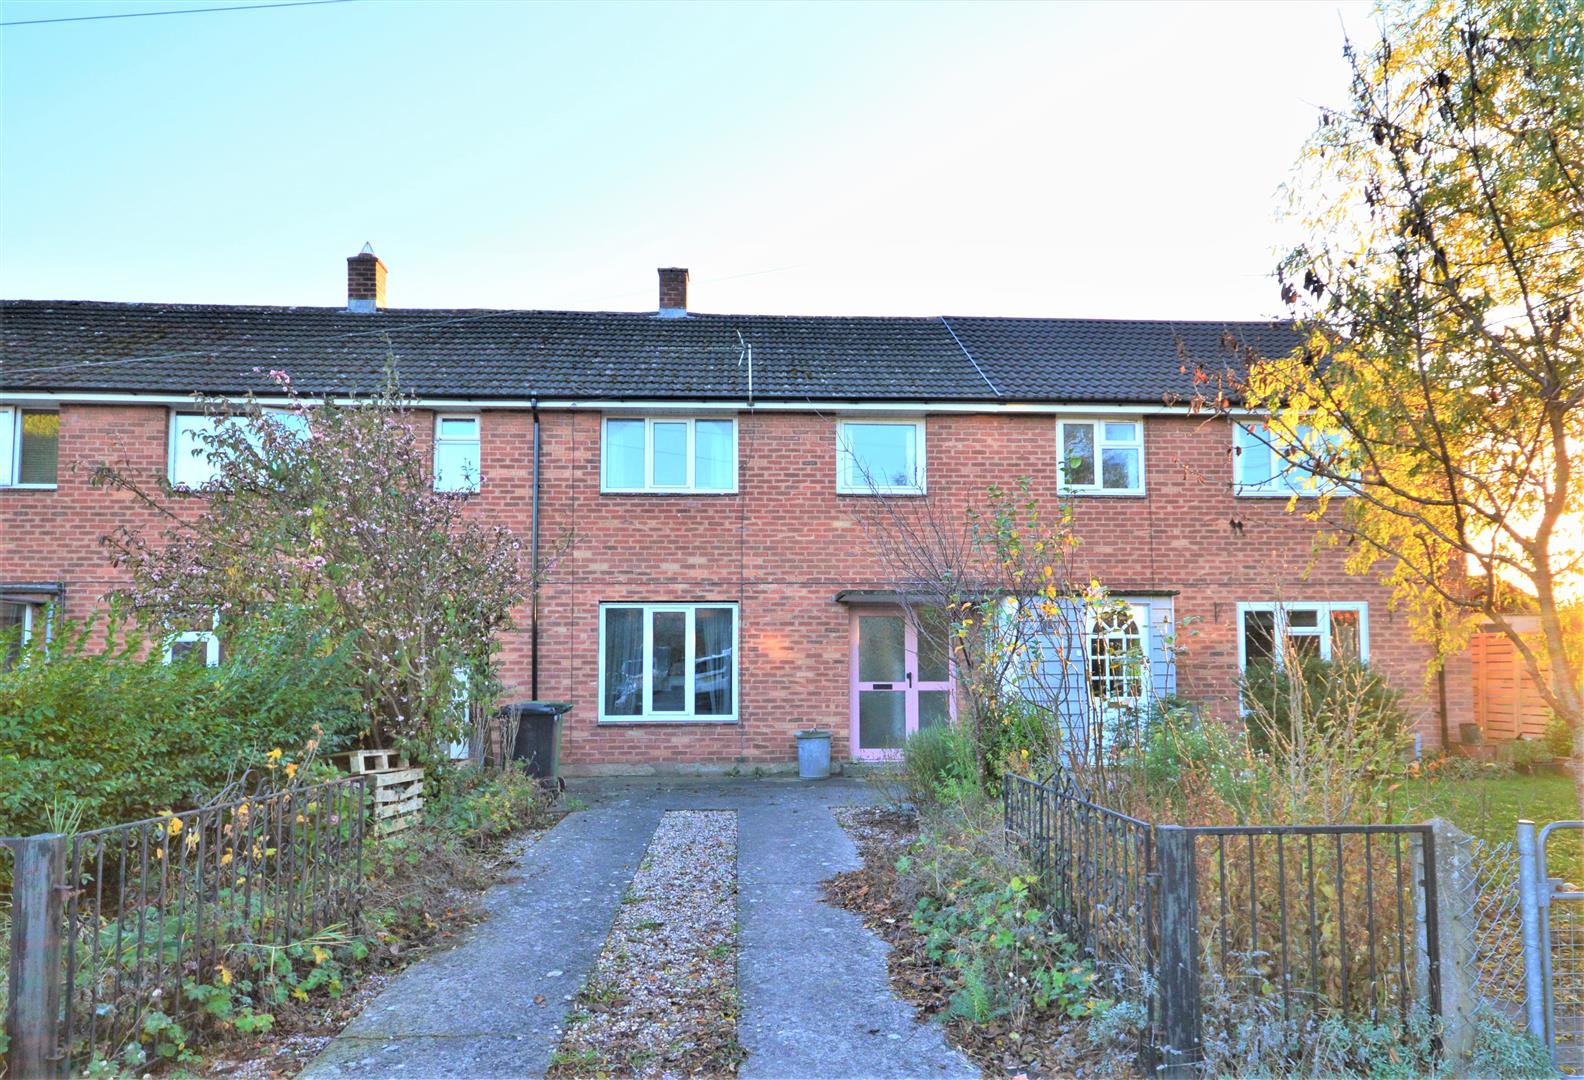 3 bed terraced for sale in Ewyas Harold - Property Image 1